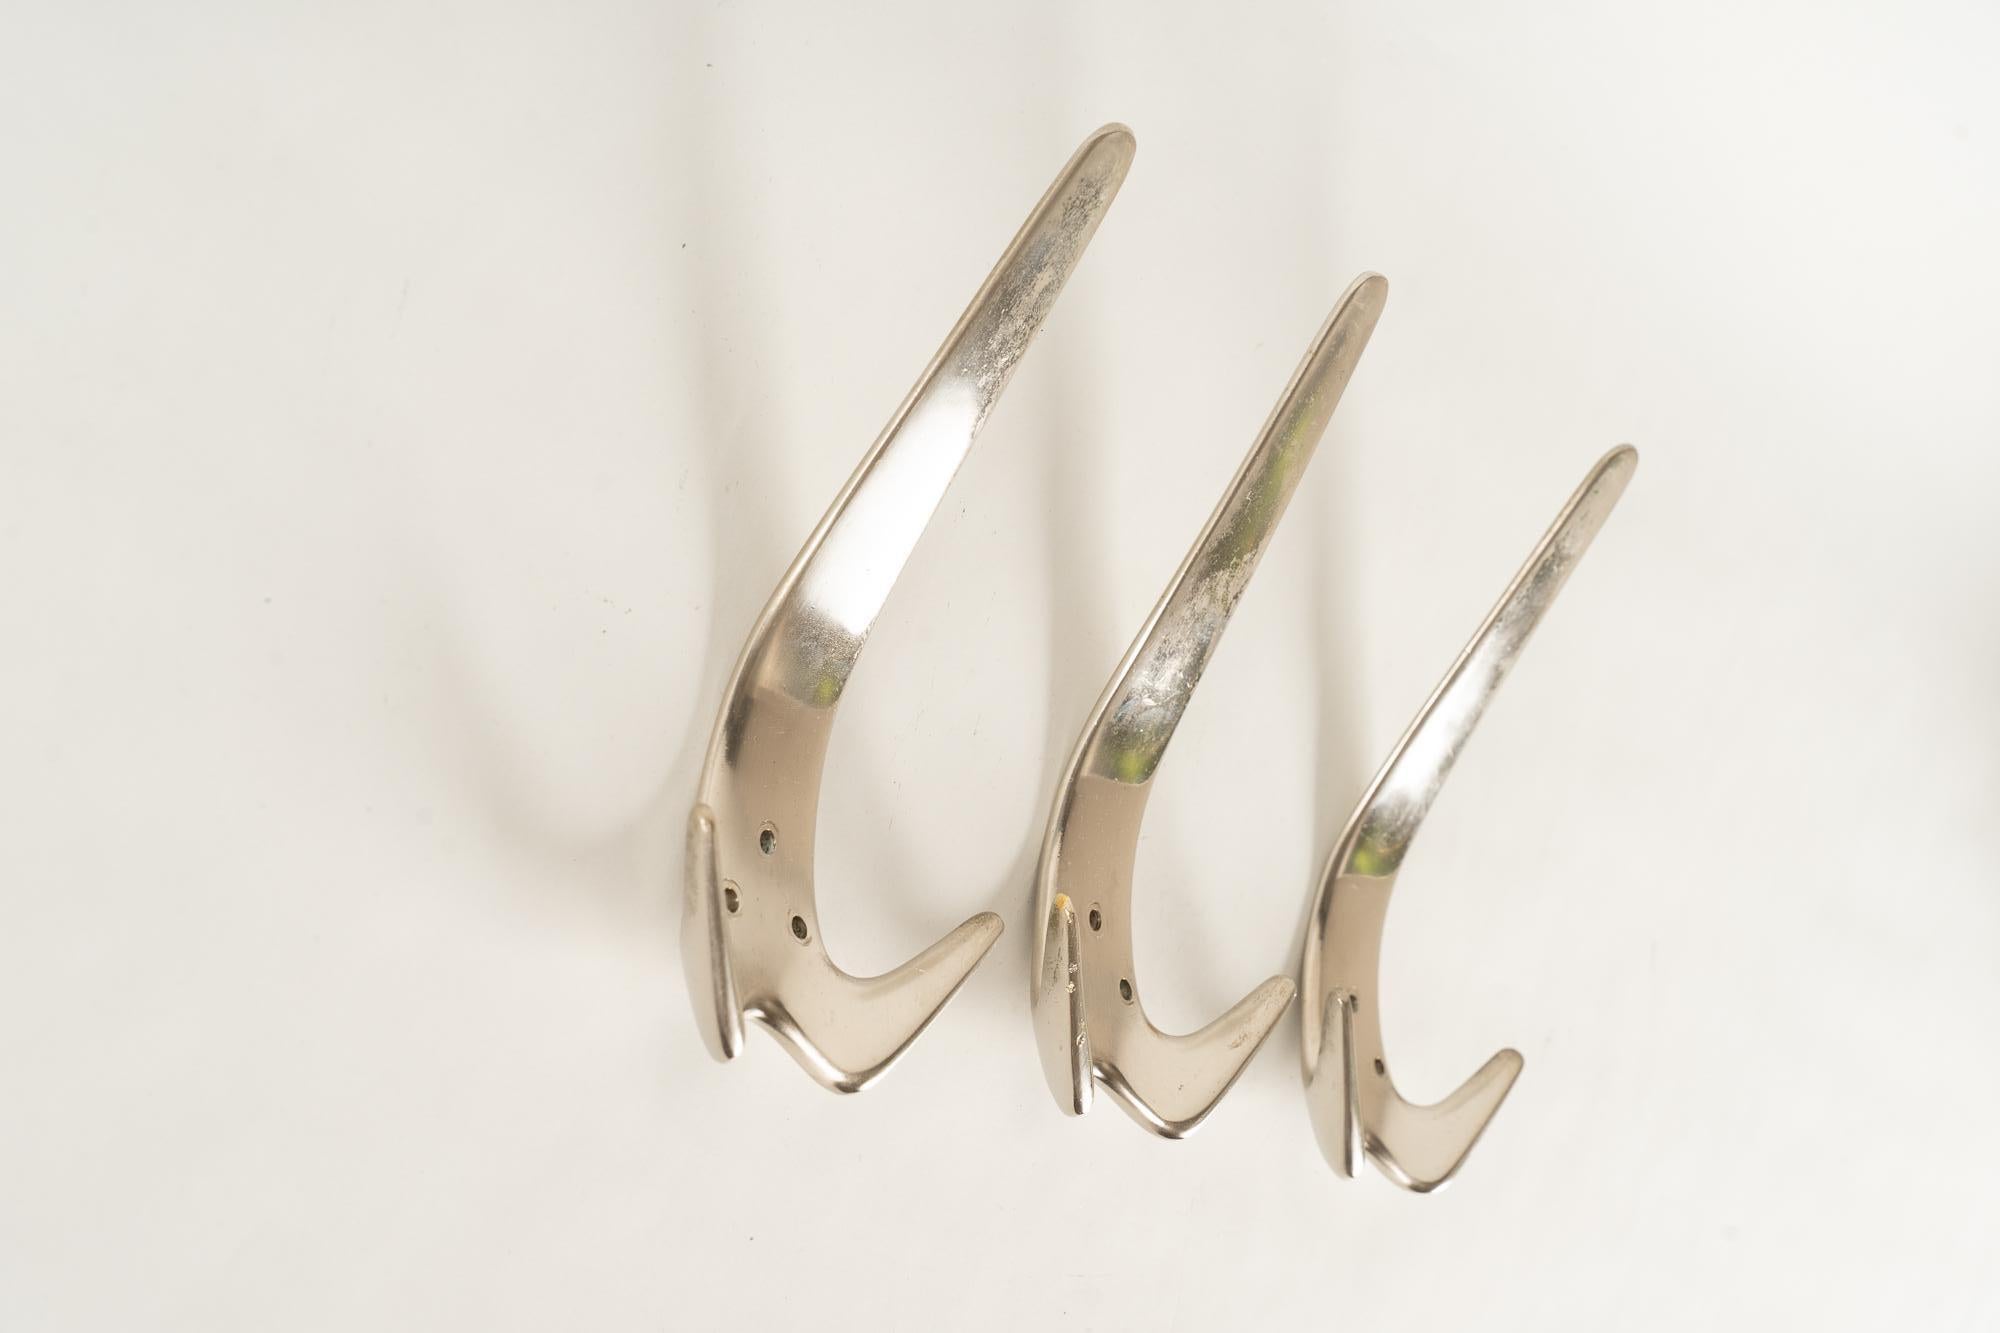 Plated Charming Auböck Wall Hooks, circa 1950s For Sale